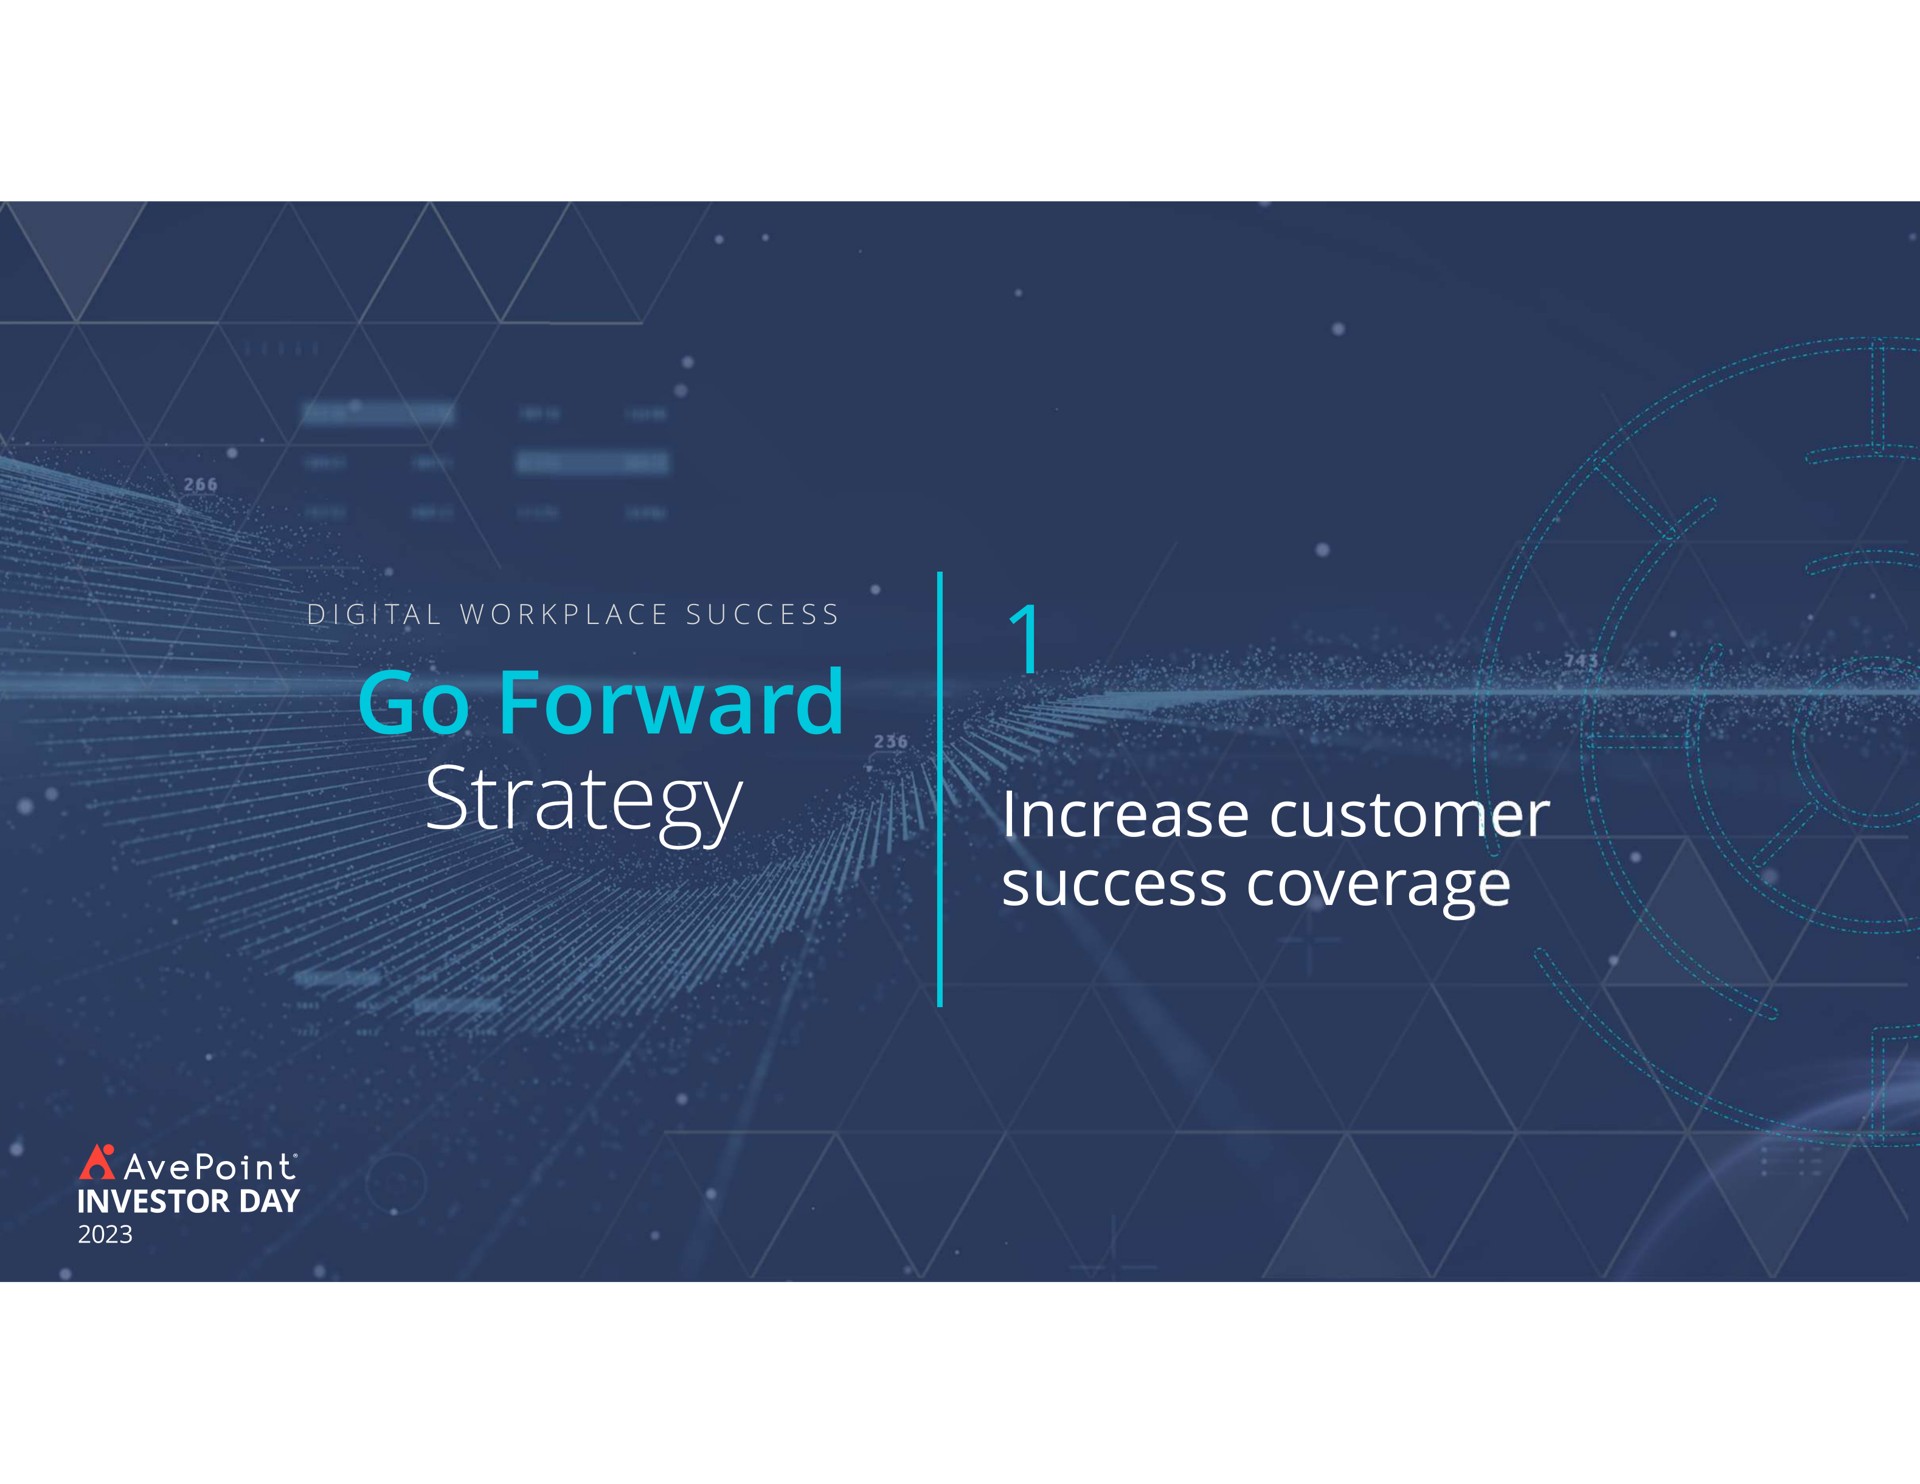 go forward strategy increase customer success coverage | AvePoint